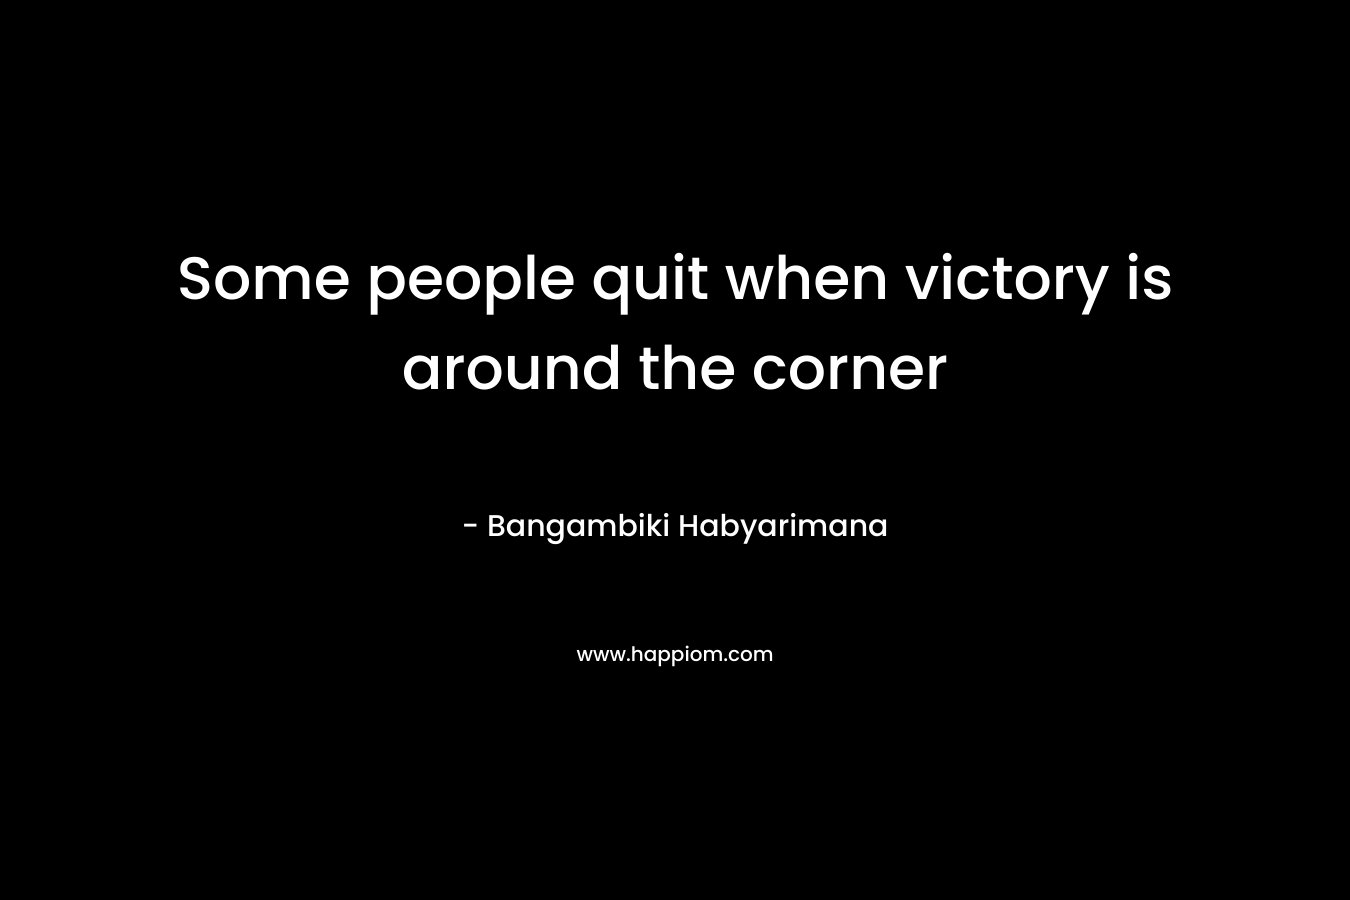 Some people quit when victory is around the corner